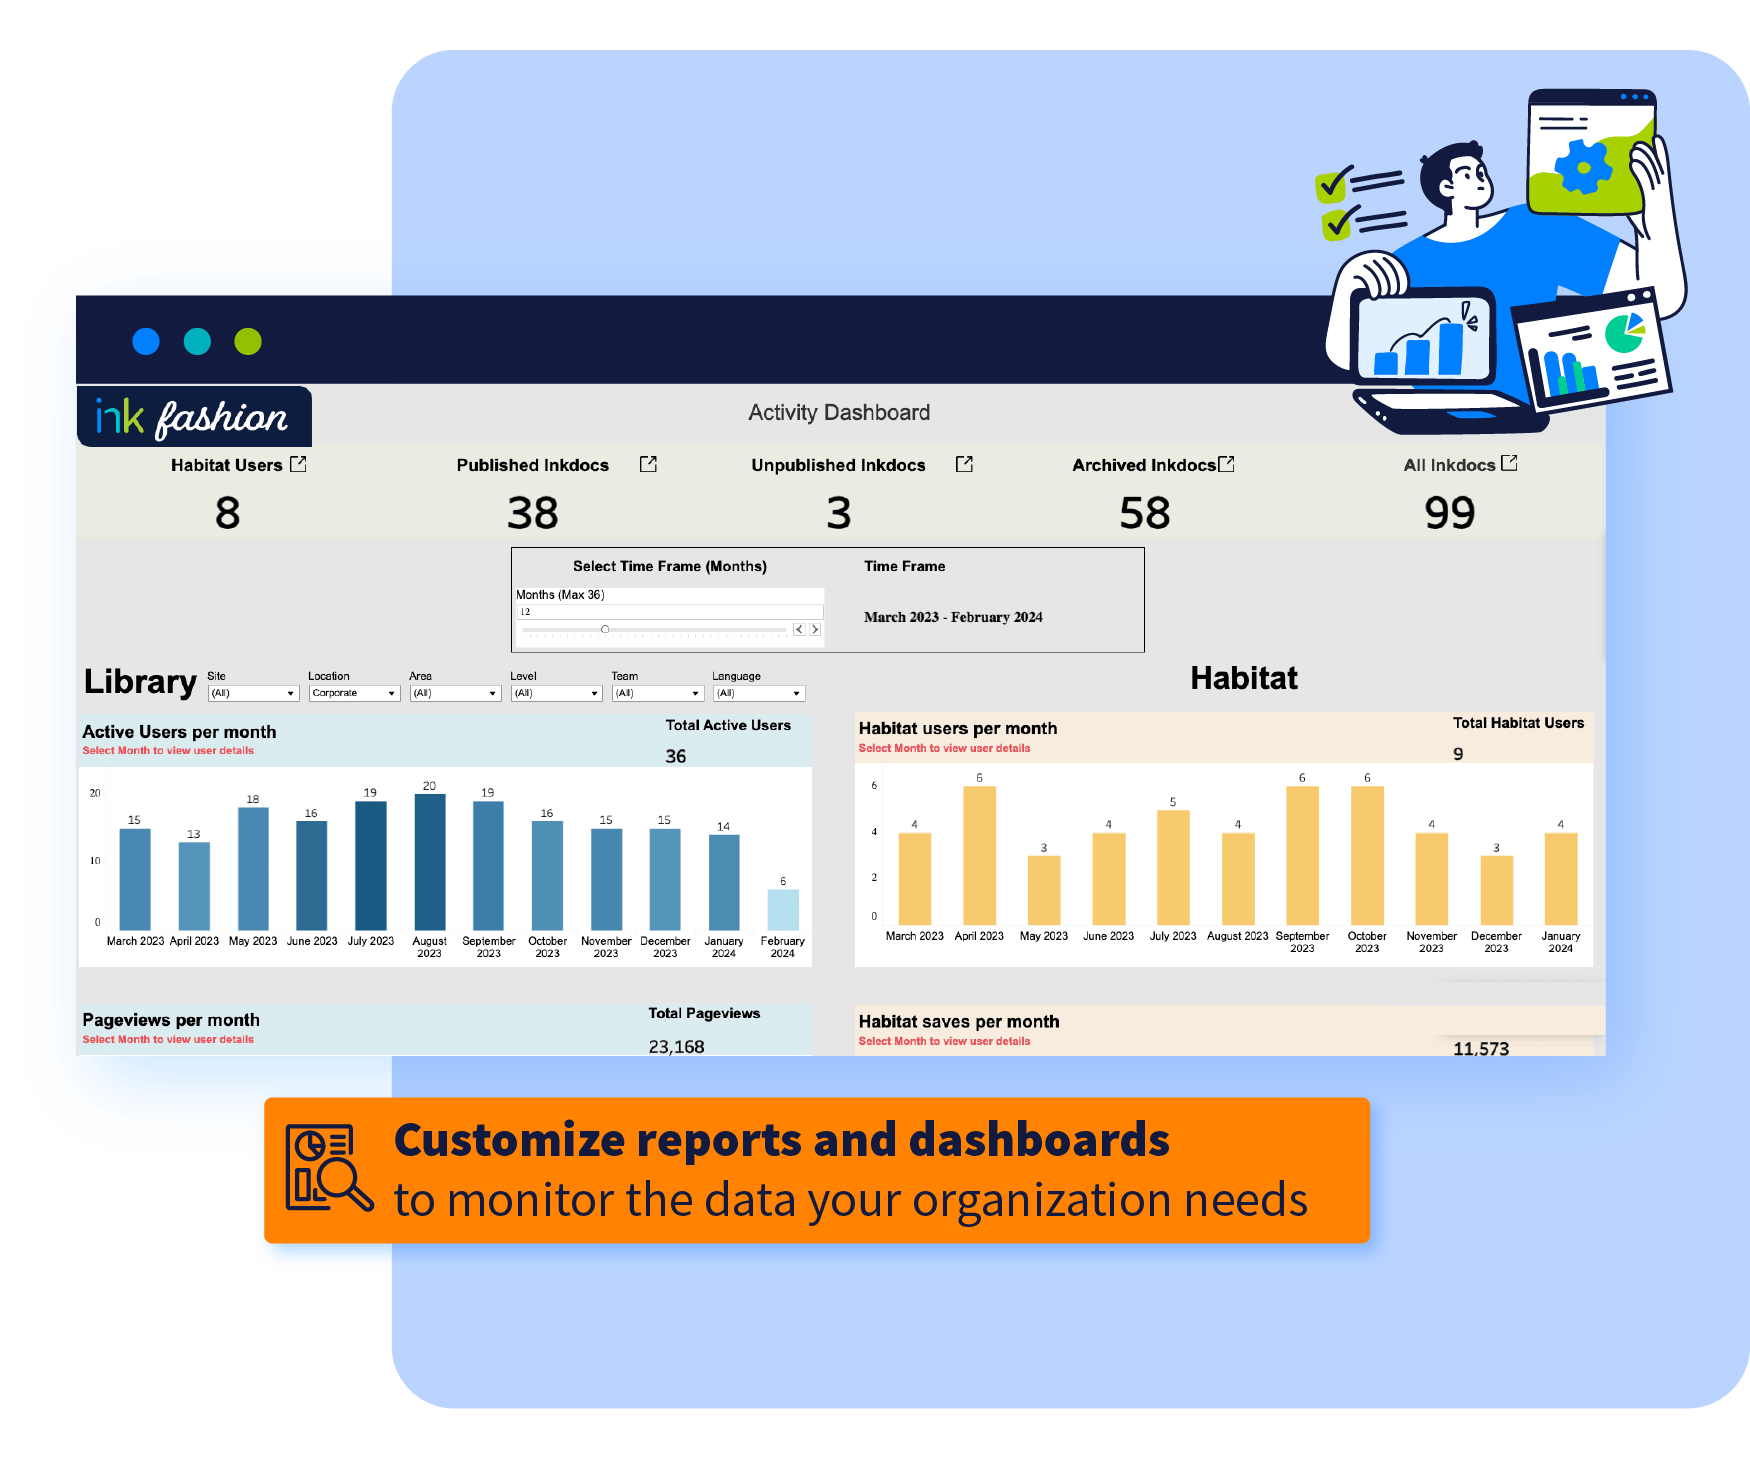 Web Product Images Customized Dashboards reporting analytics